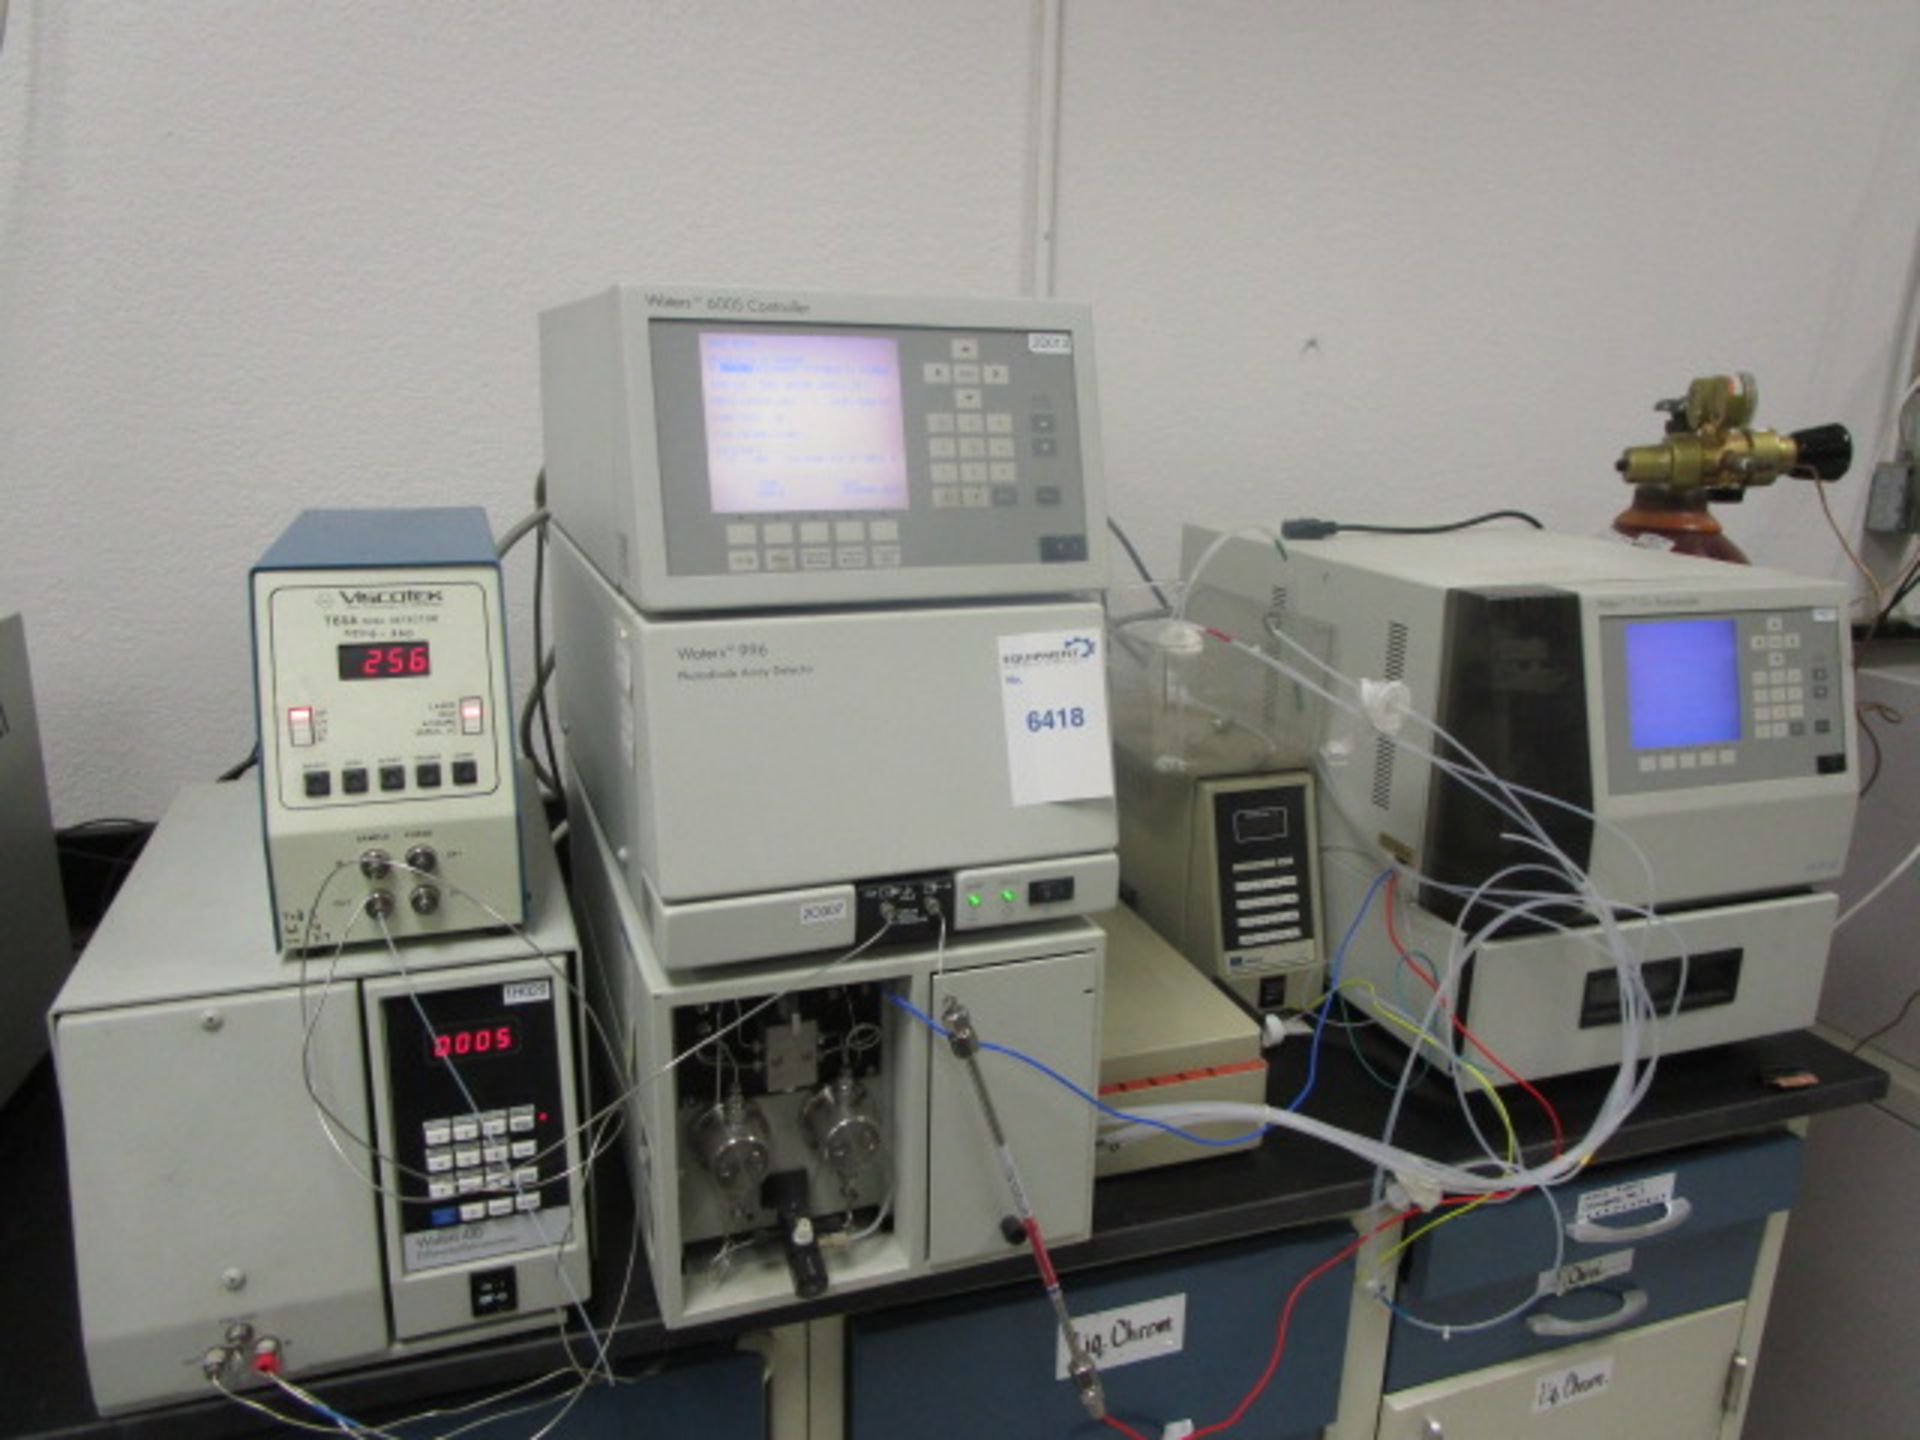 Waters HPLC system incudes autosampler, Model 717 plus, 600S pump with controller, photodiode